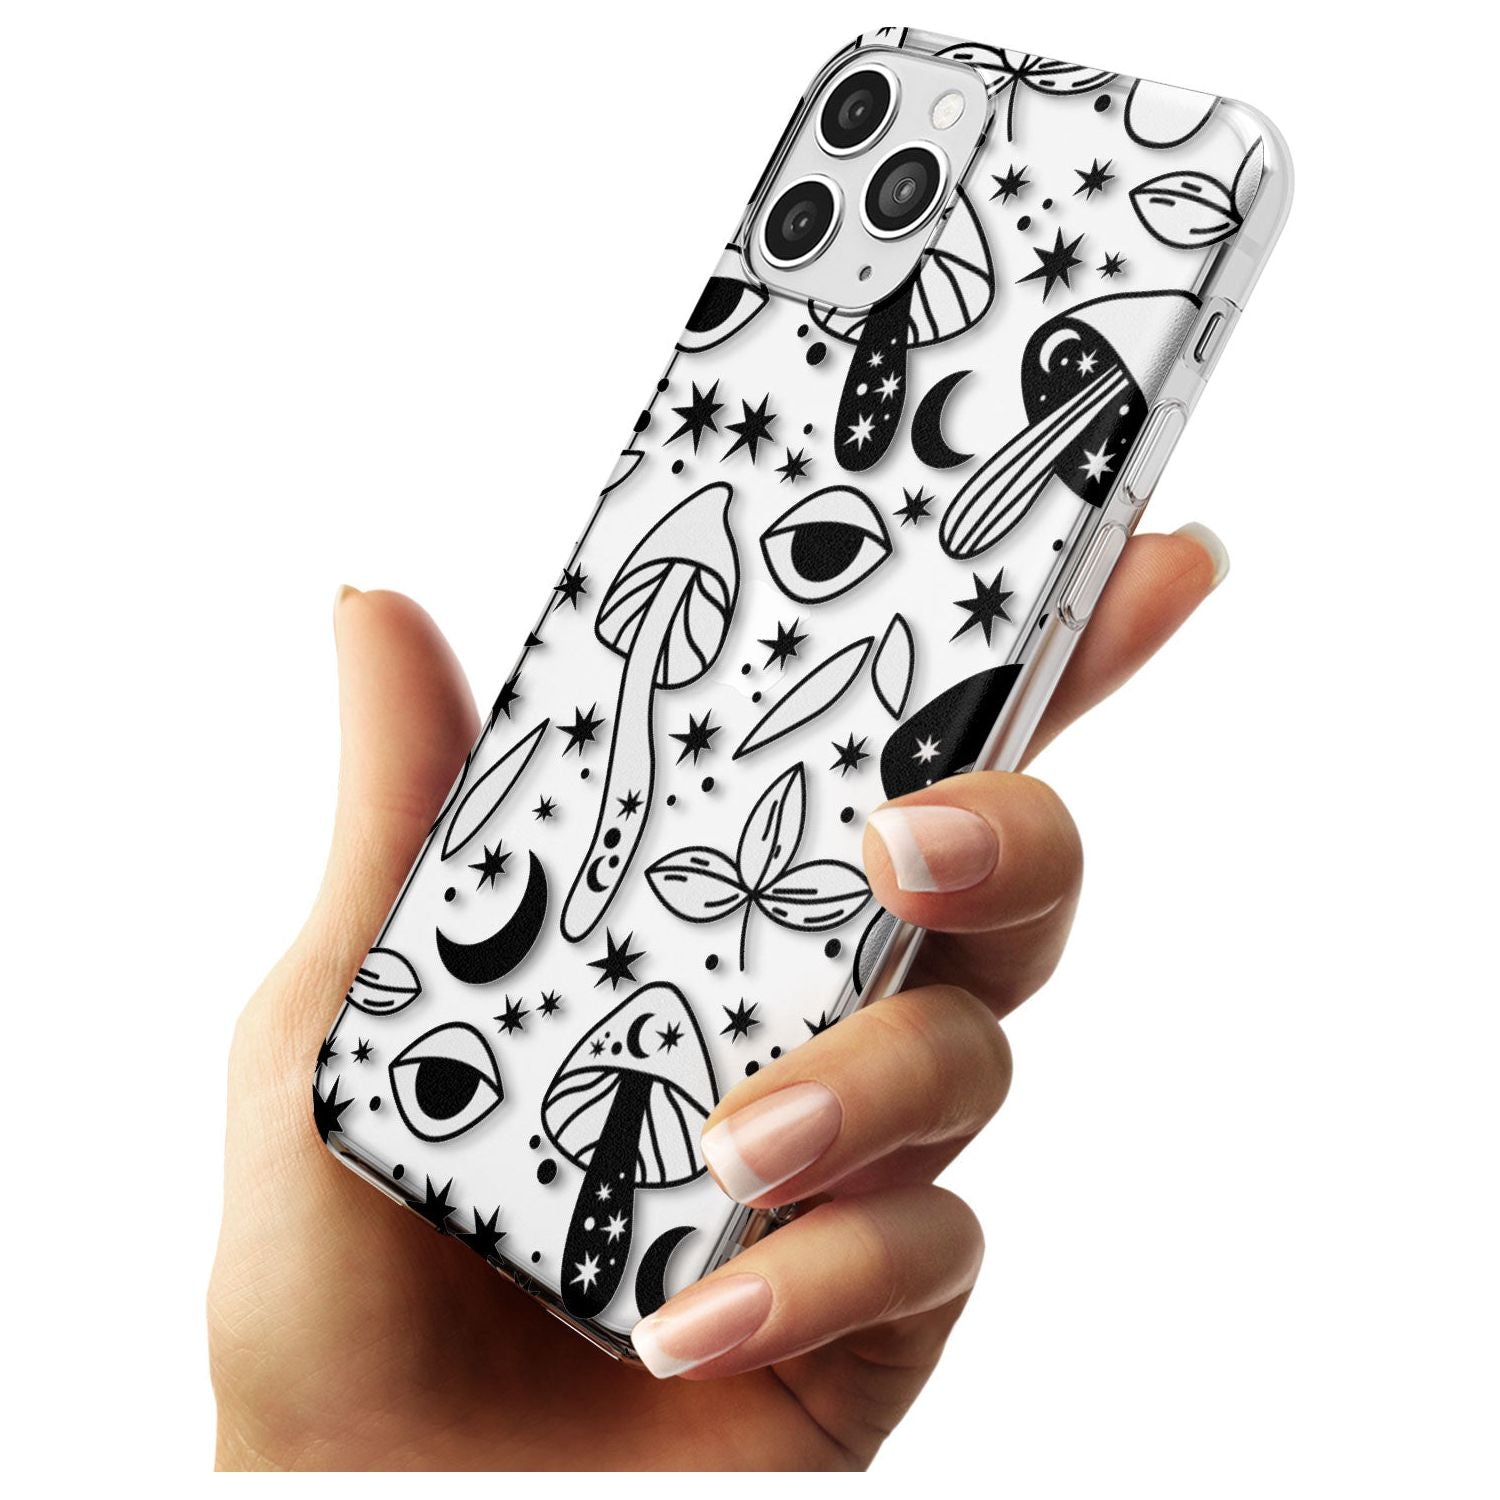 Psychedelic Mushrooms Pattern Slim TPU Phone Case for iPhone 11 Pro Max